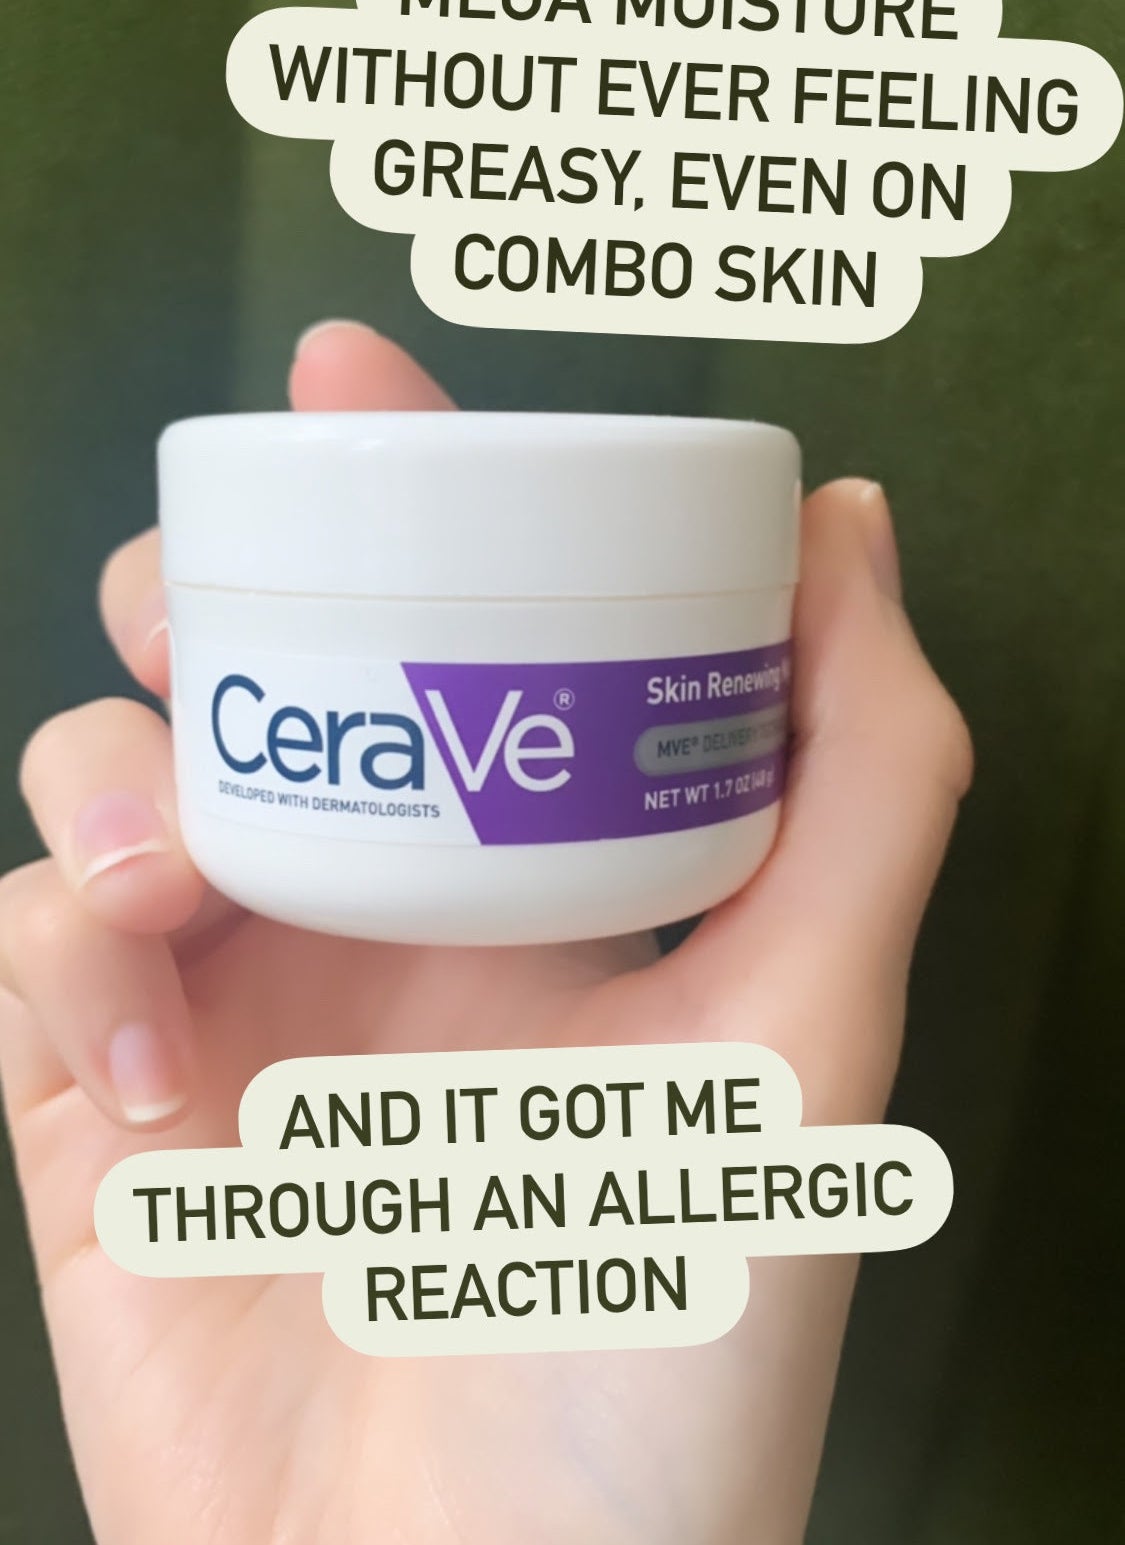 buzzfeed editor holding a jar of cream captioned &quot;mega moisture without ever feeling greasy, even on combo skin, and it got me through an allergic reaction&quot;